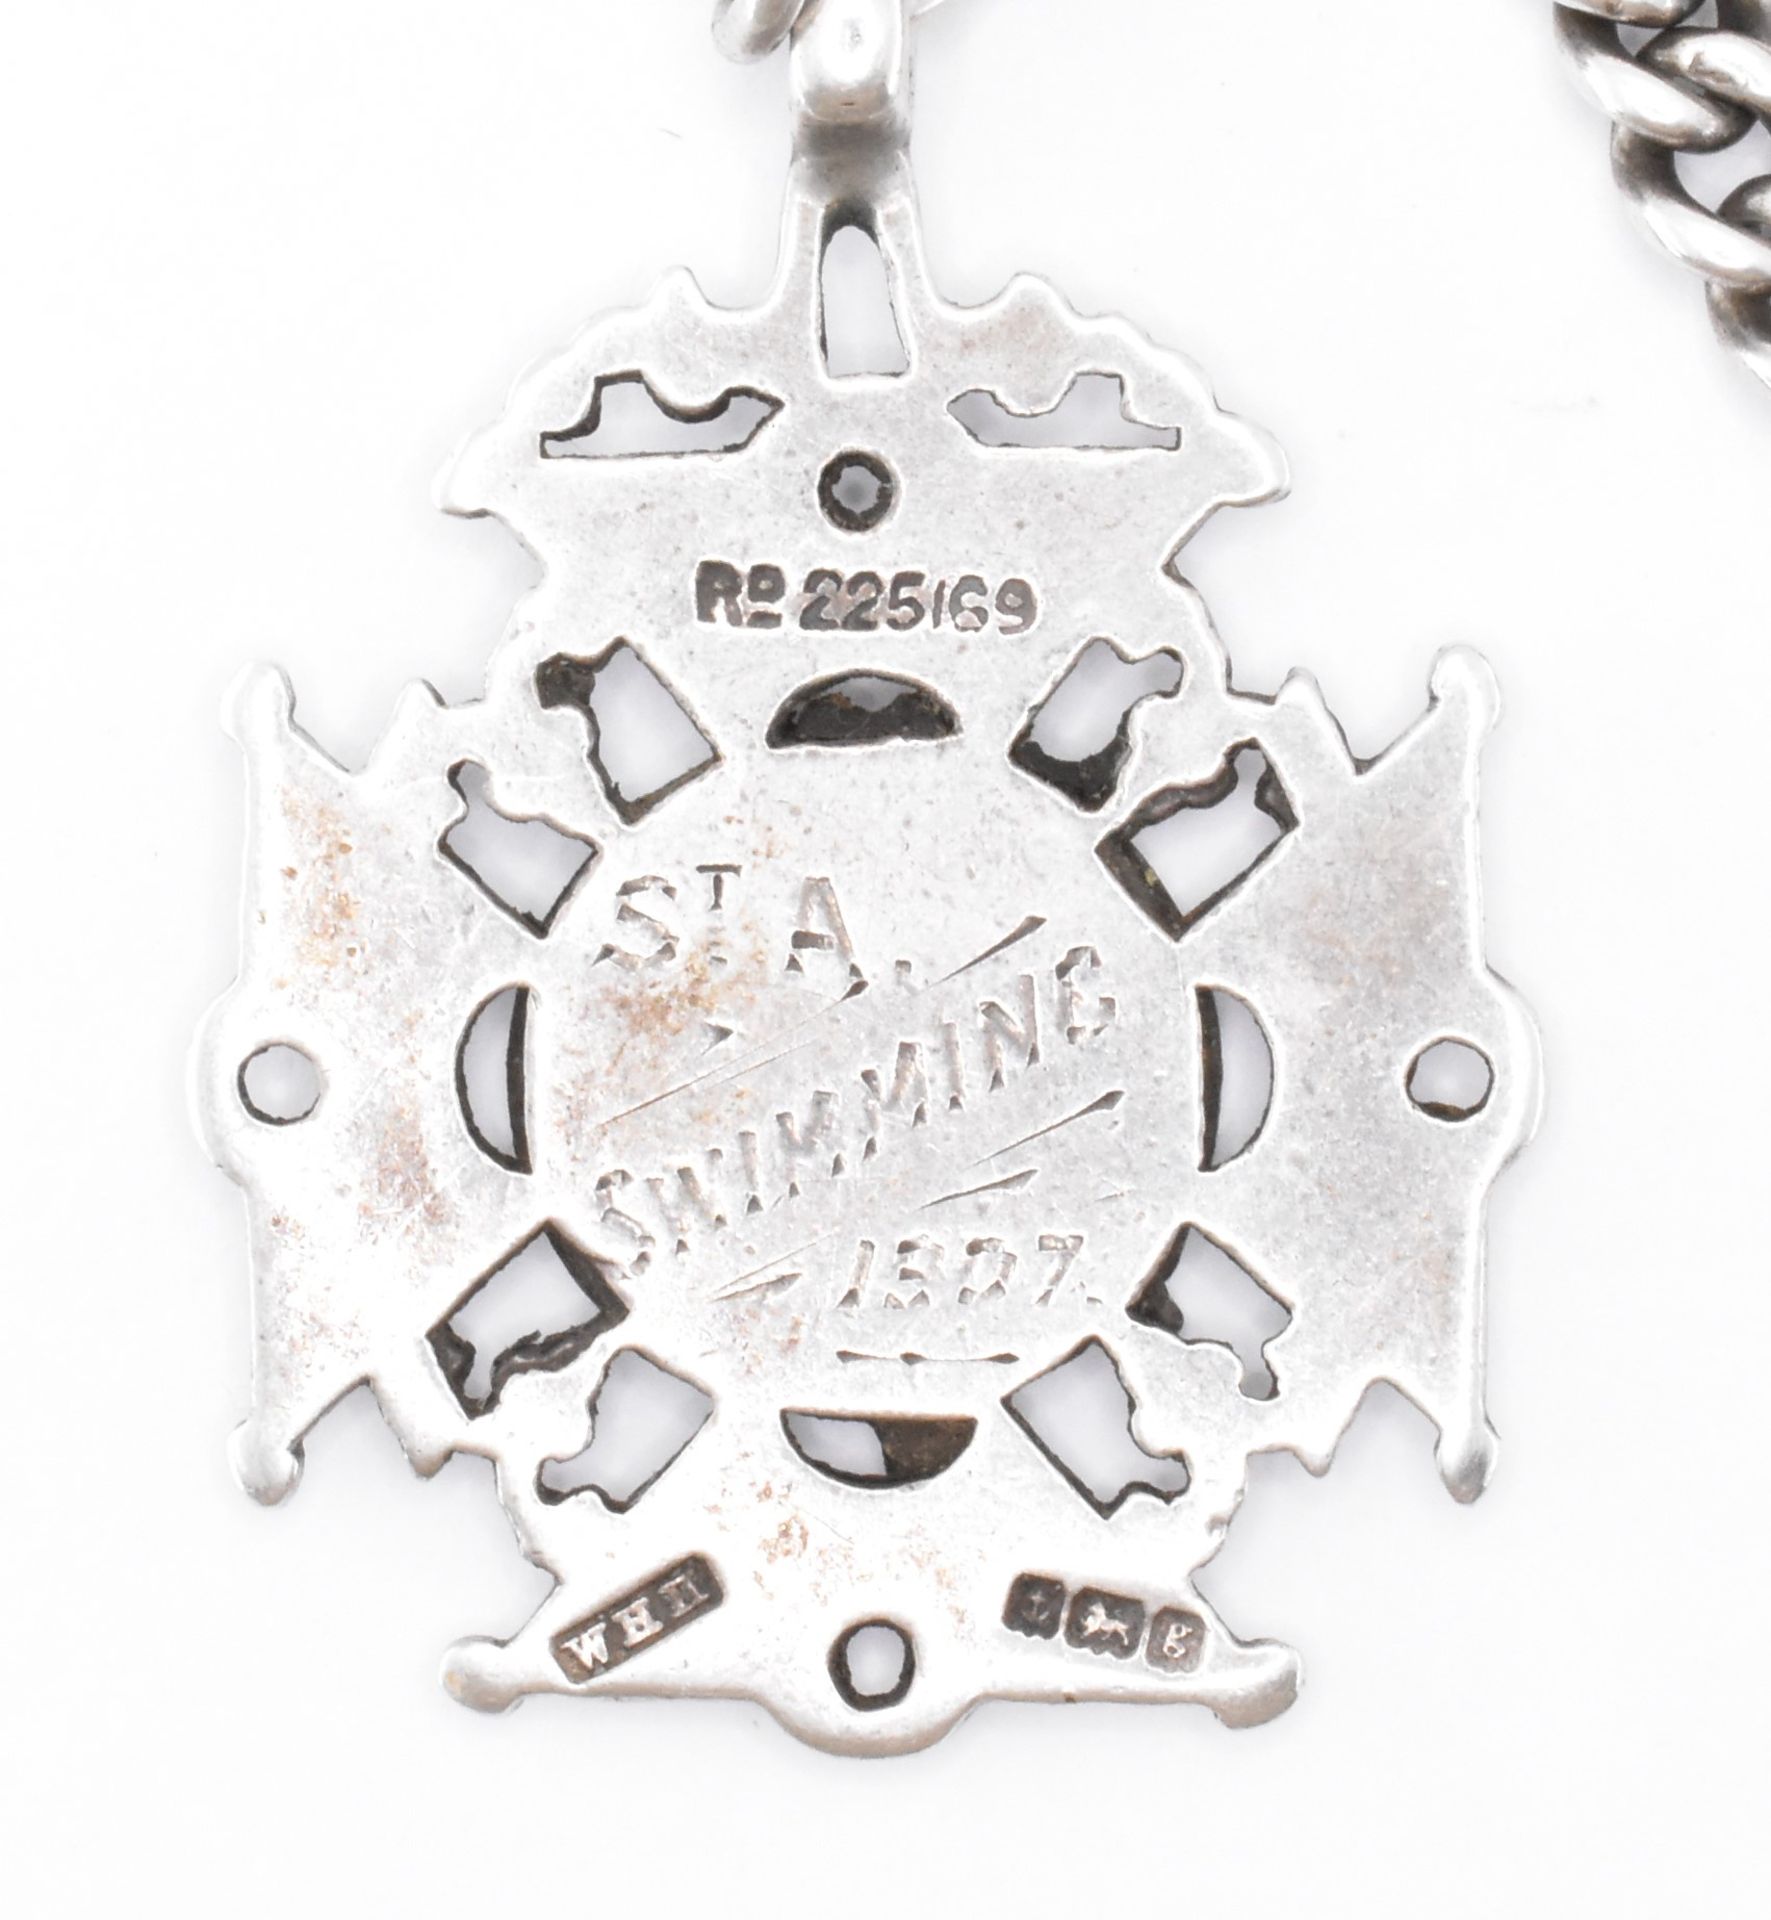 EDWARDIAN SILVER POCKET WATCH CHAIN WITH VESTA & MEDAL - Image 9 of 12